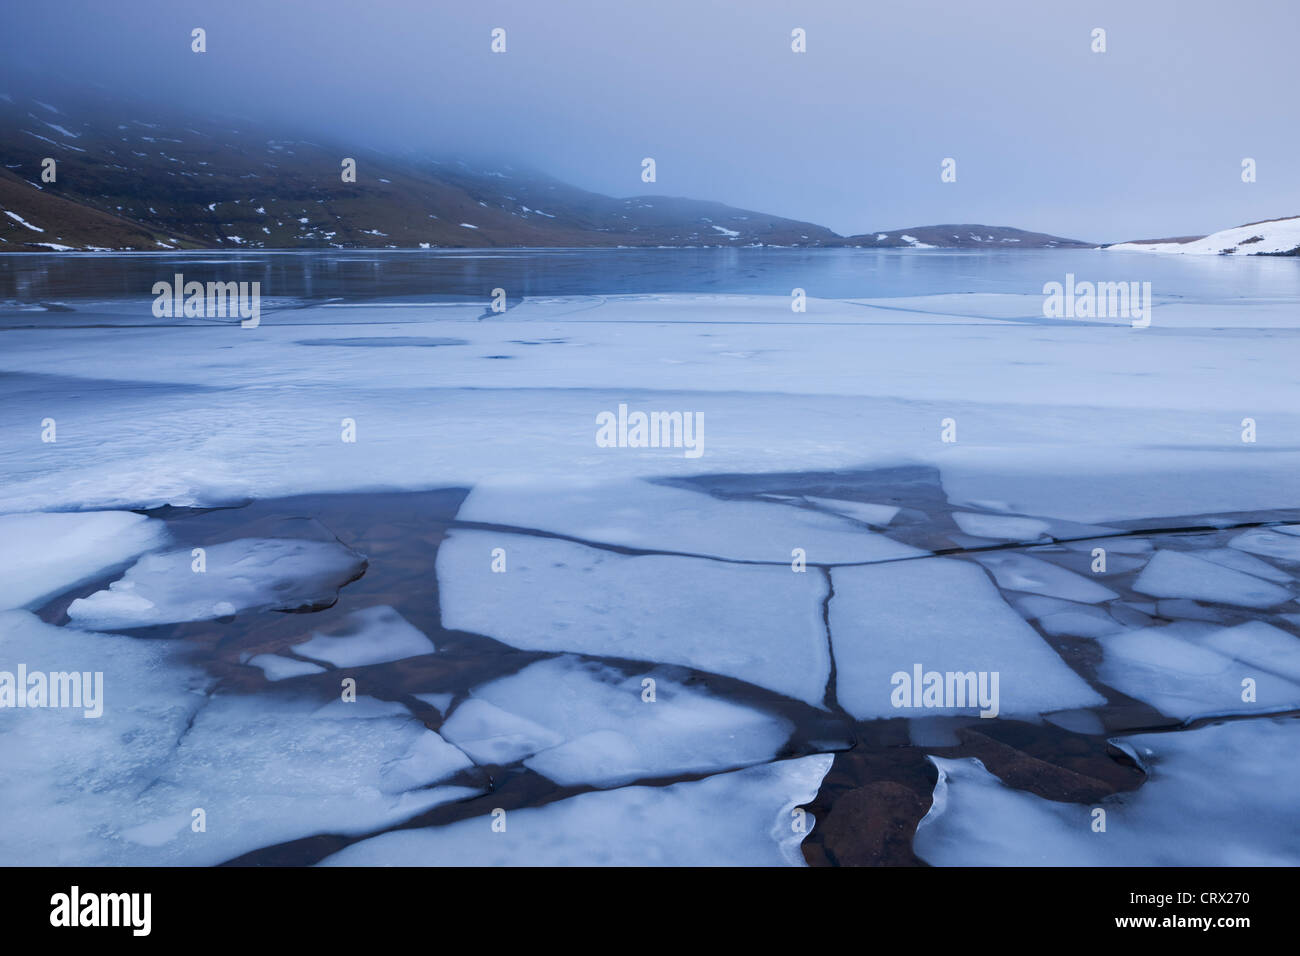 Broken ice on the surface of Llyn y Fan Fawr in the Black Mountain, Brecon Beacons National Park, Wales. Stock Photo